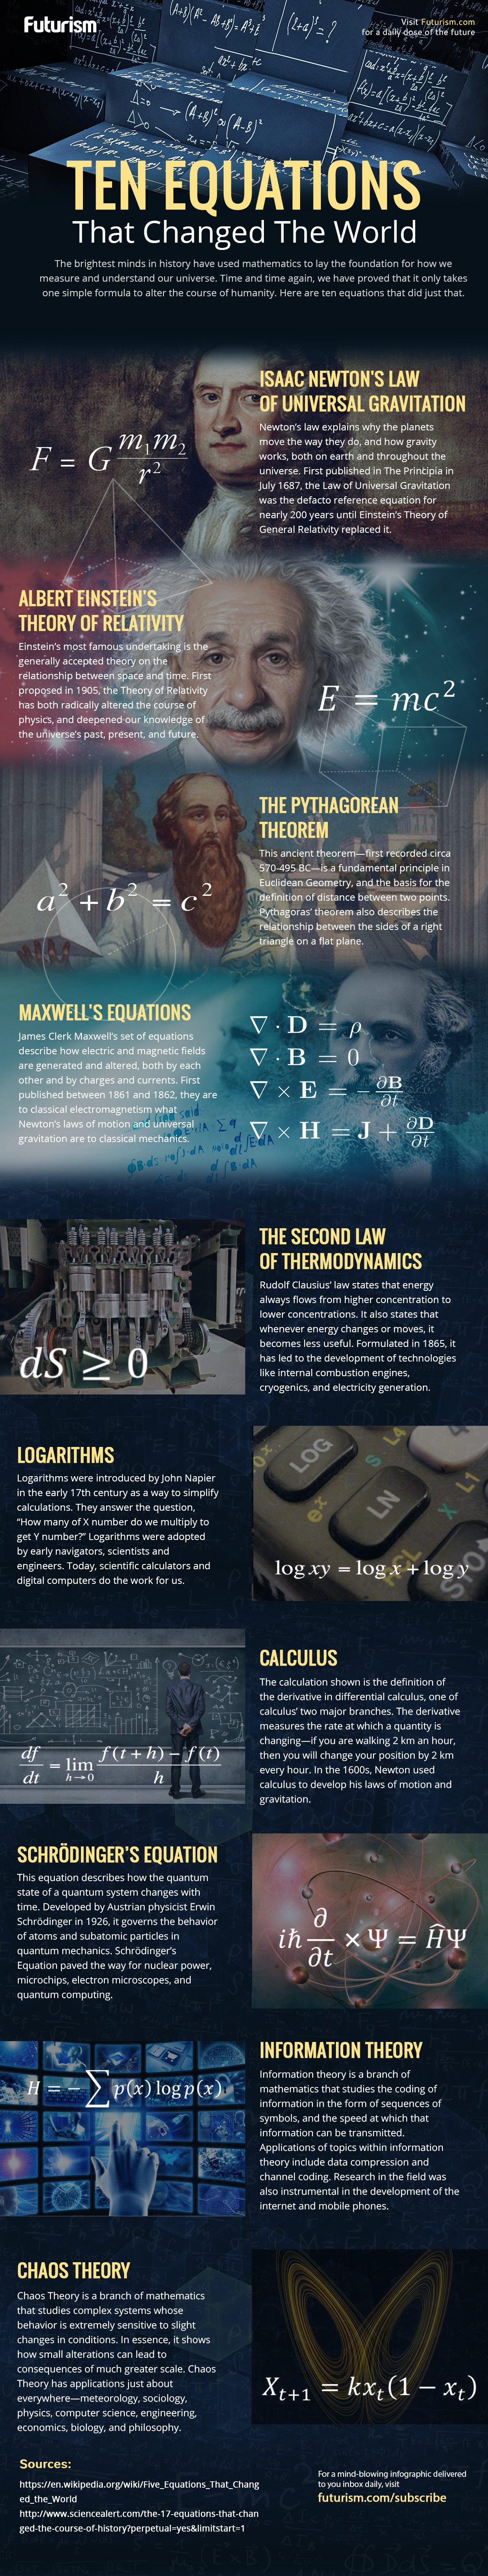 10-equations-that-changed-the-world_v4